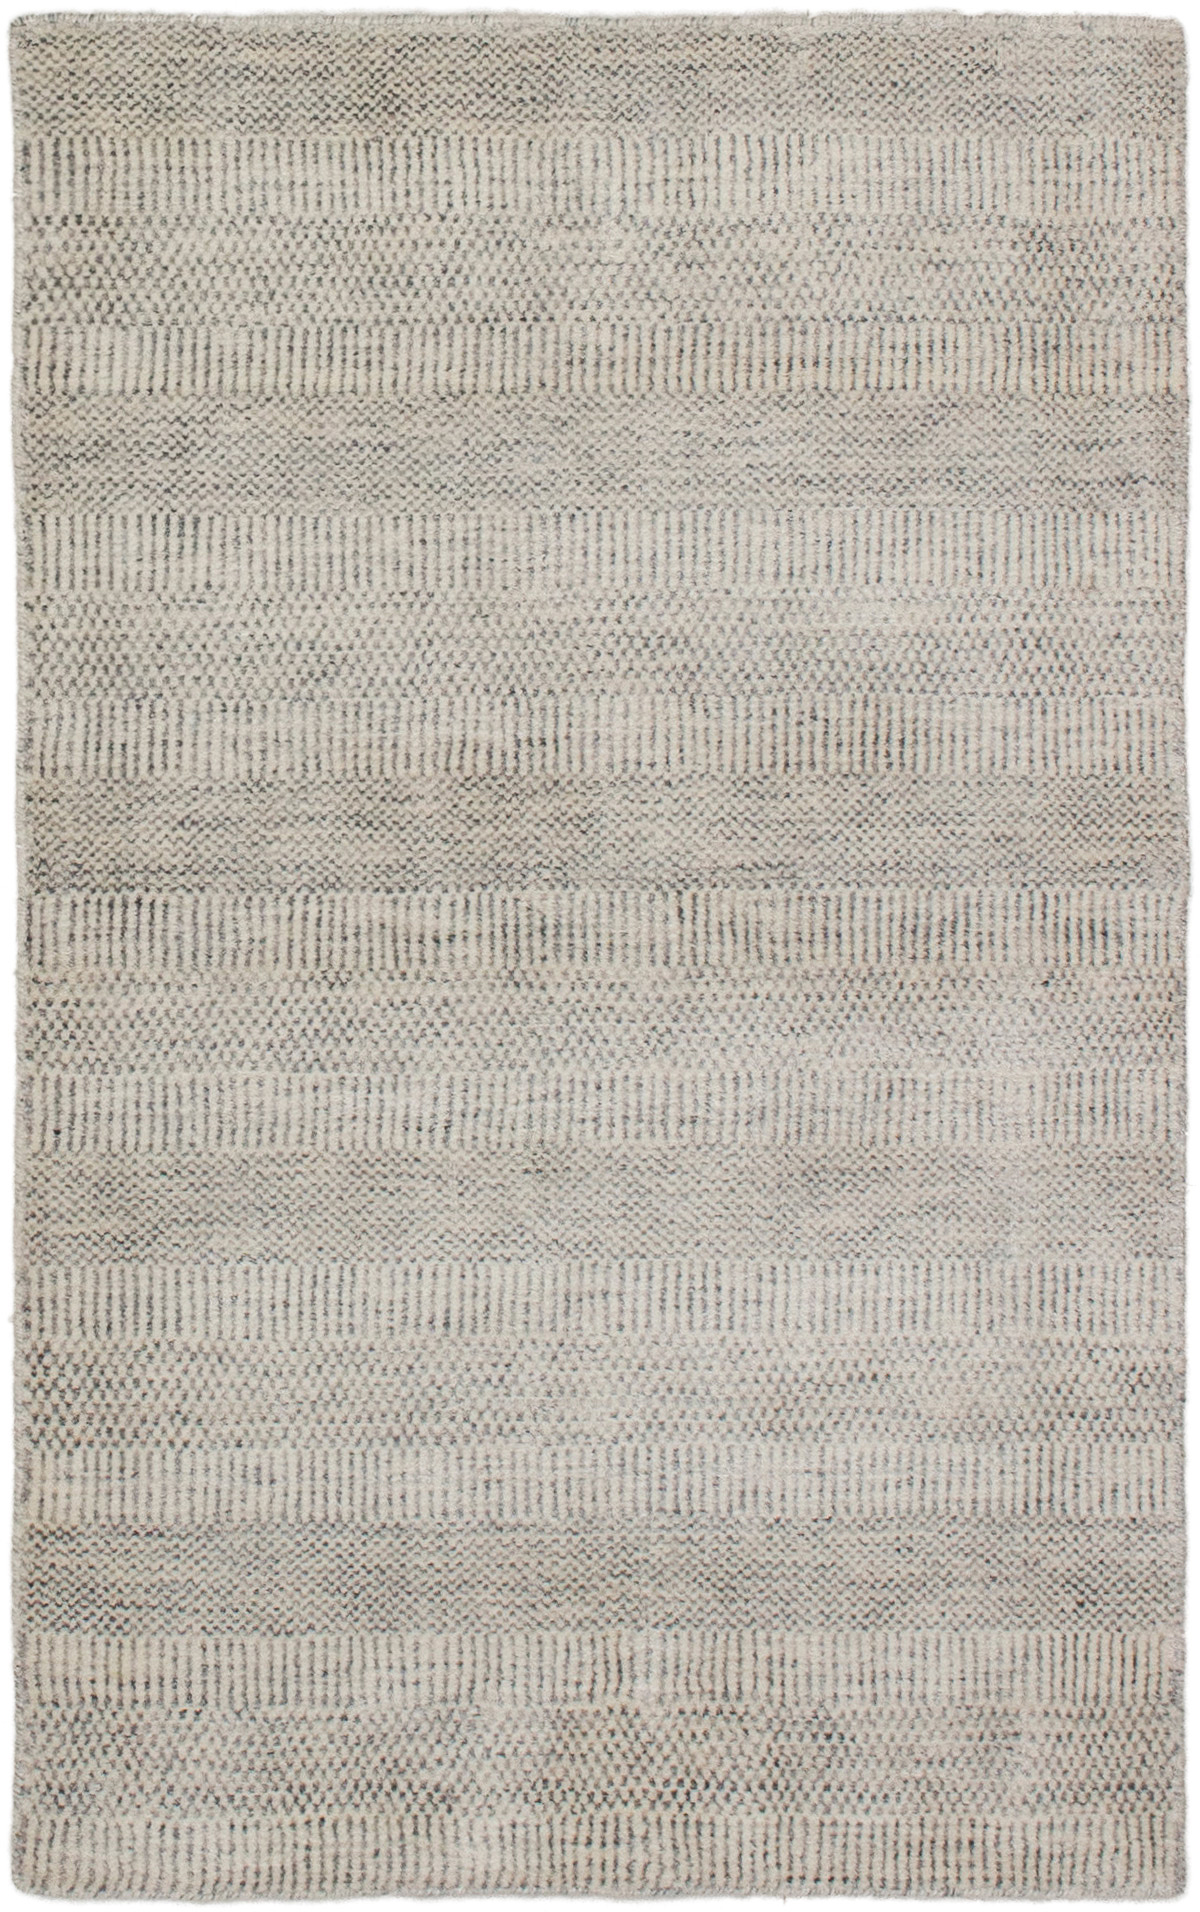 Hand-knotted Pearl Grey  Rug 3'0" x 5'0"  Size: 3'0" x 5'0"  